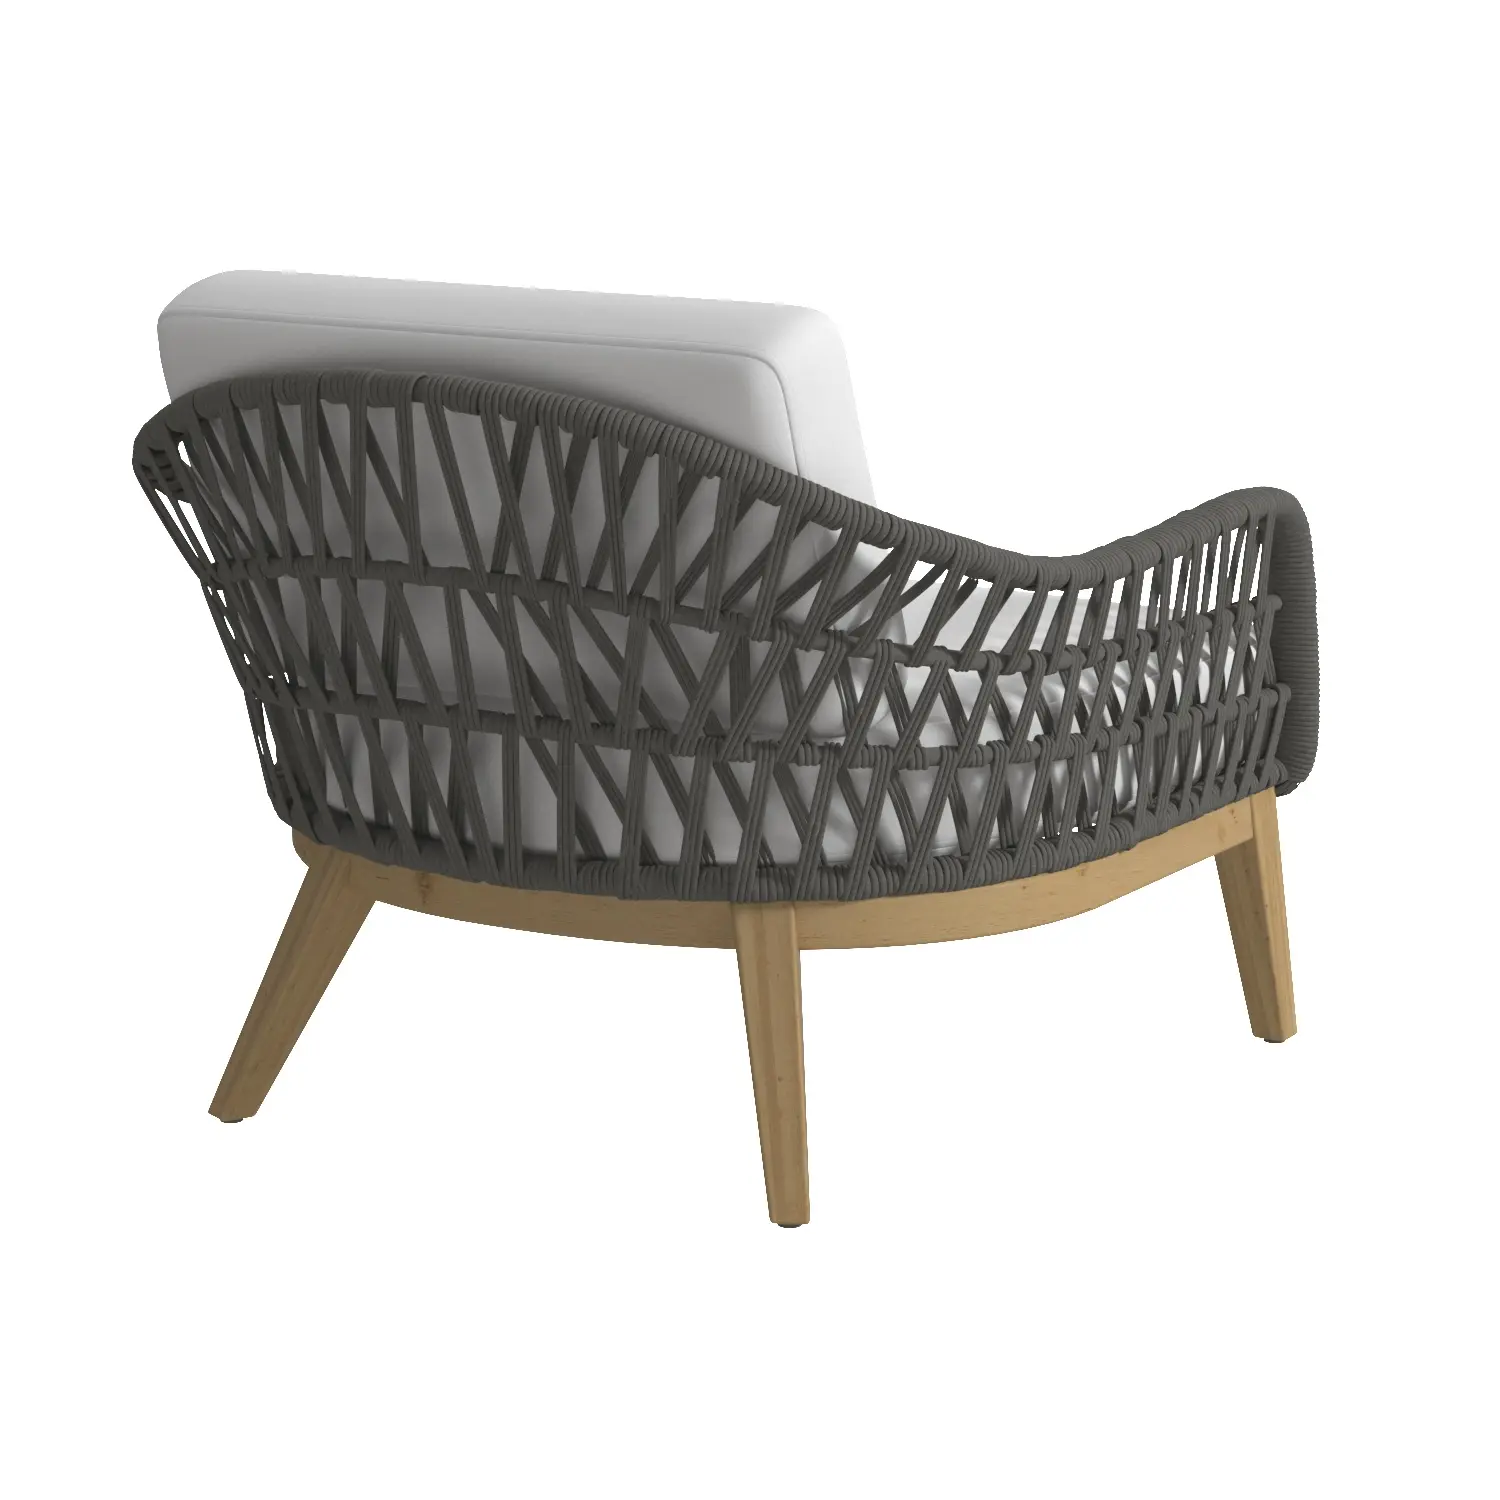 Napoli Outdoor Lounge Chair 3D Model_06